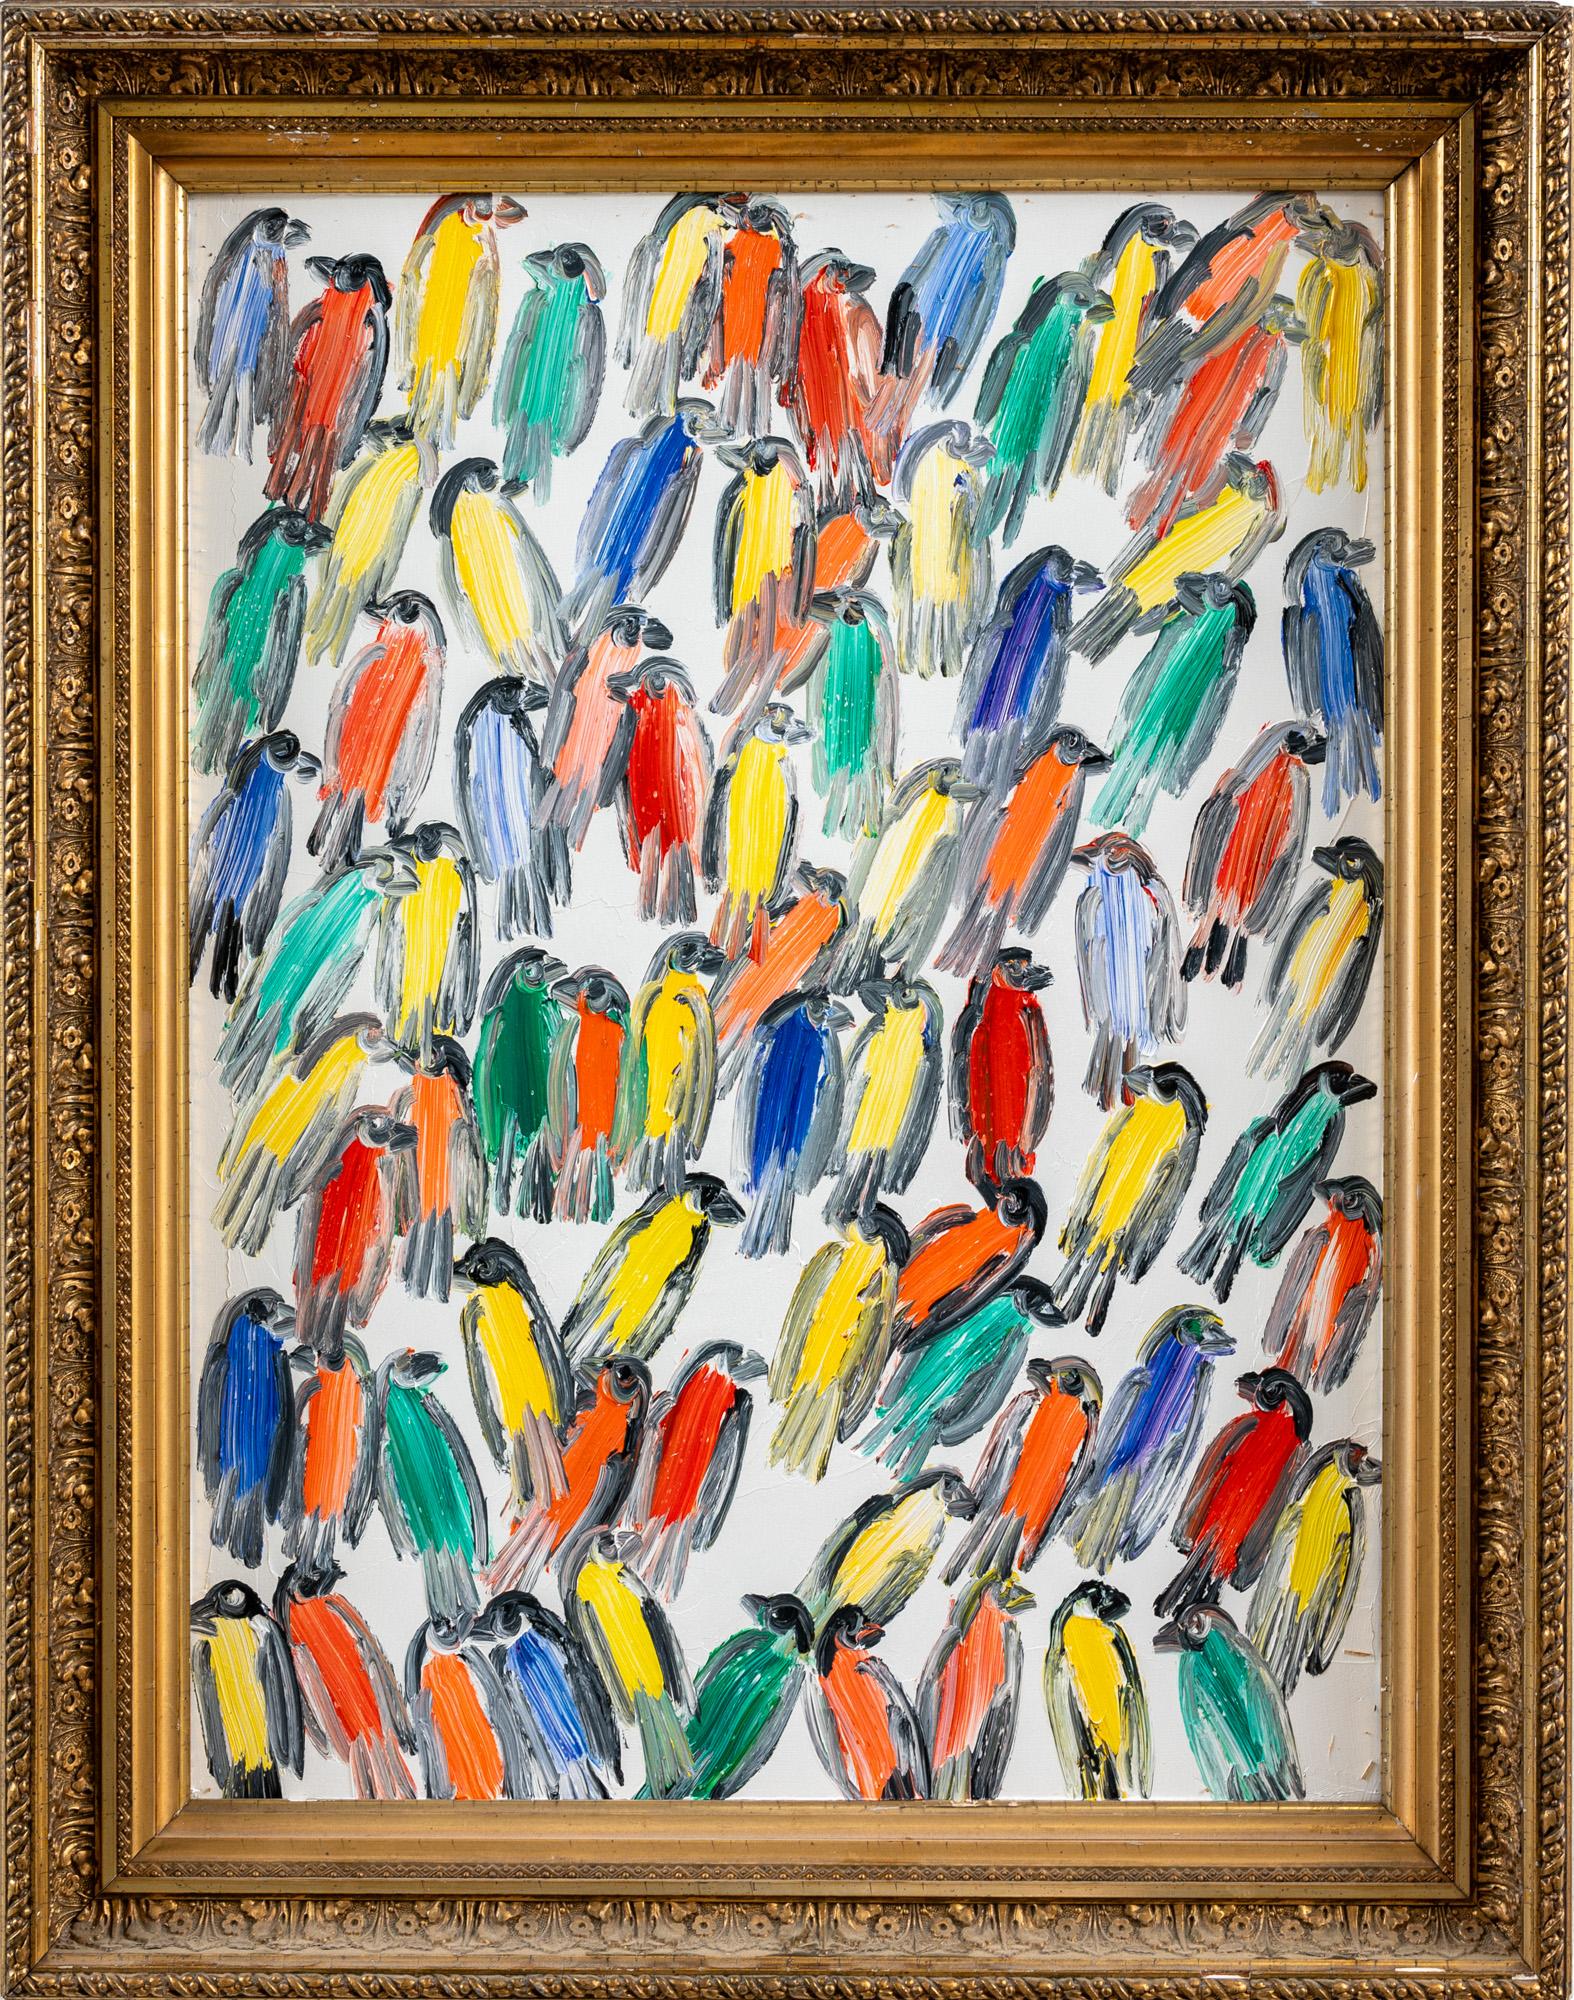 "Finches" is a framed oil painting on wood by Hunt Slonem, depicting an arrangement of small birds in a wide variety of bright colors. 

This piece is finished in an antique gold frame, which has been hand-selected by the artist for this painting.